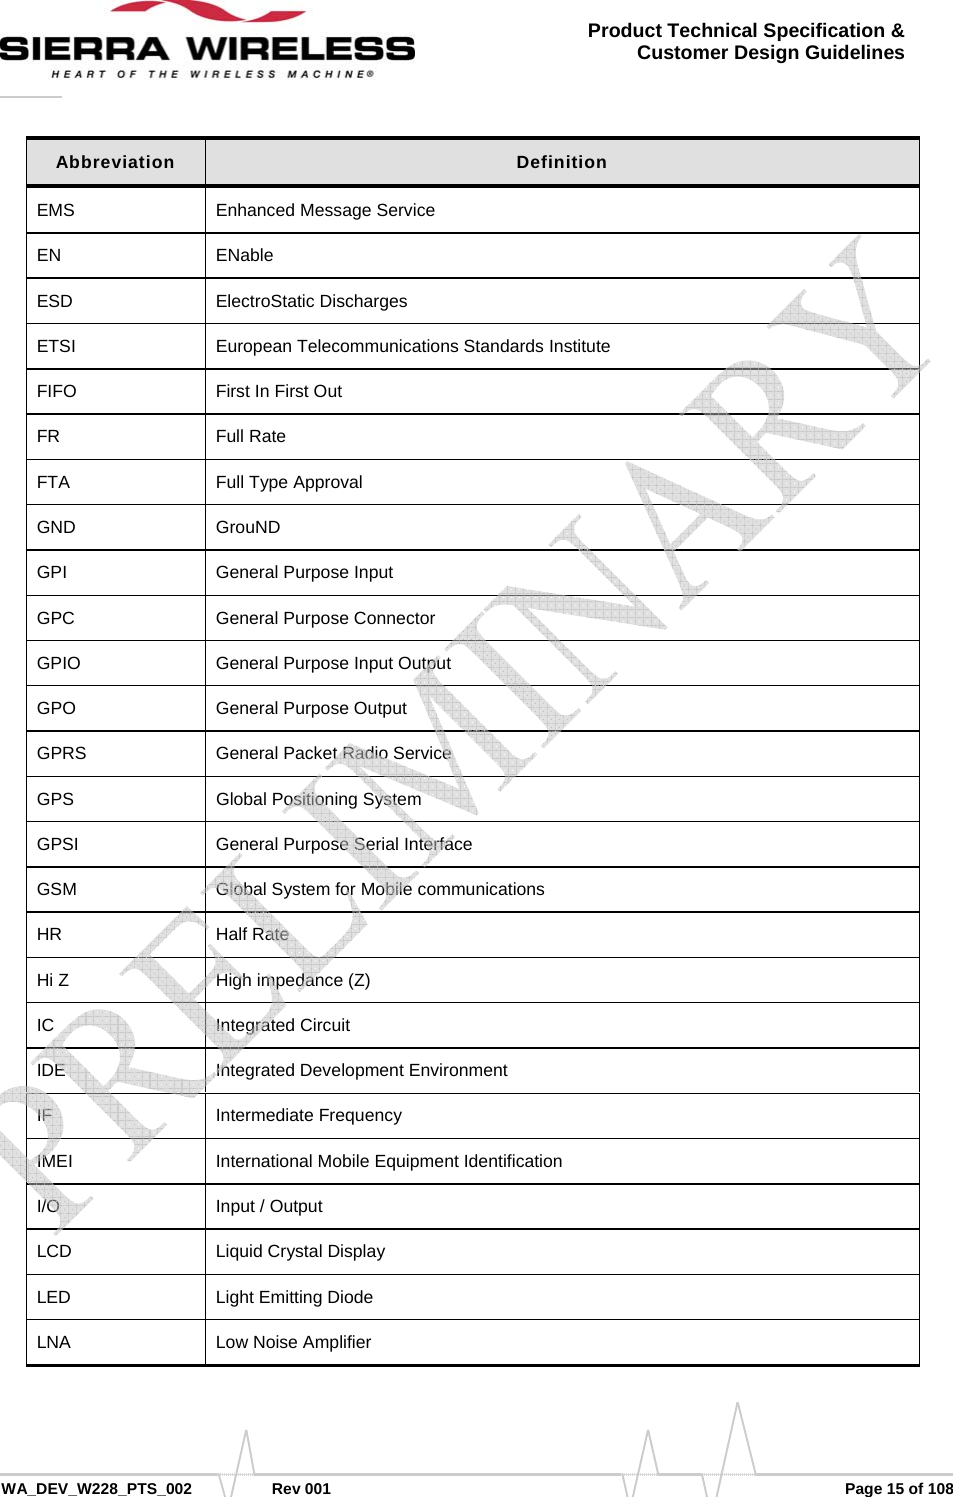      WA_DEV_W228_PTS_002 Rev 001  Page 15 of 108 Product Technical Specification &amp; Customer Design Guidelines Abbreviation  Definition EMS  Enhanced Message Service EN ENable ESD ElectroStatic Discharges ETSI European Telecommunications Standards Institute FIFO First In First Out FR Full Rate FTA Full Type Approval GND GrouND GPI General Purpose Input GPC General Purpose Connector GPIO  General Purpose Input Output GPO General Purpose Output GPRS General Packet Radio Service GPS  Global Positioning System GPSI General Purpose Serial Interface GSM  Global System for Mobile communications HR Half Rate Hi Z  High impedance (Z) IC Integrated Circuit IDE Integrated Development Environment IF Intermediate Frequency IMEI  International Mobile Equipment Identification I/O Input / Output LCD Liquid Crystal Display LED  Light Emitting Diode LNA Low Noise Amplifier    